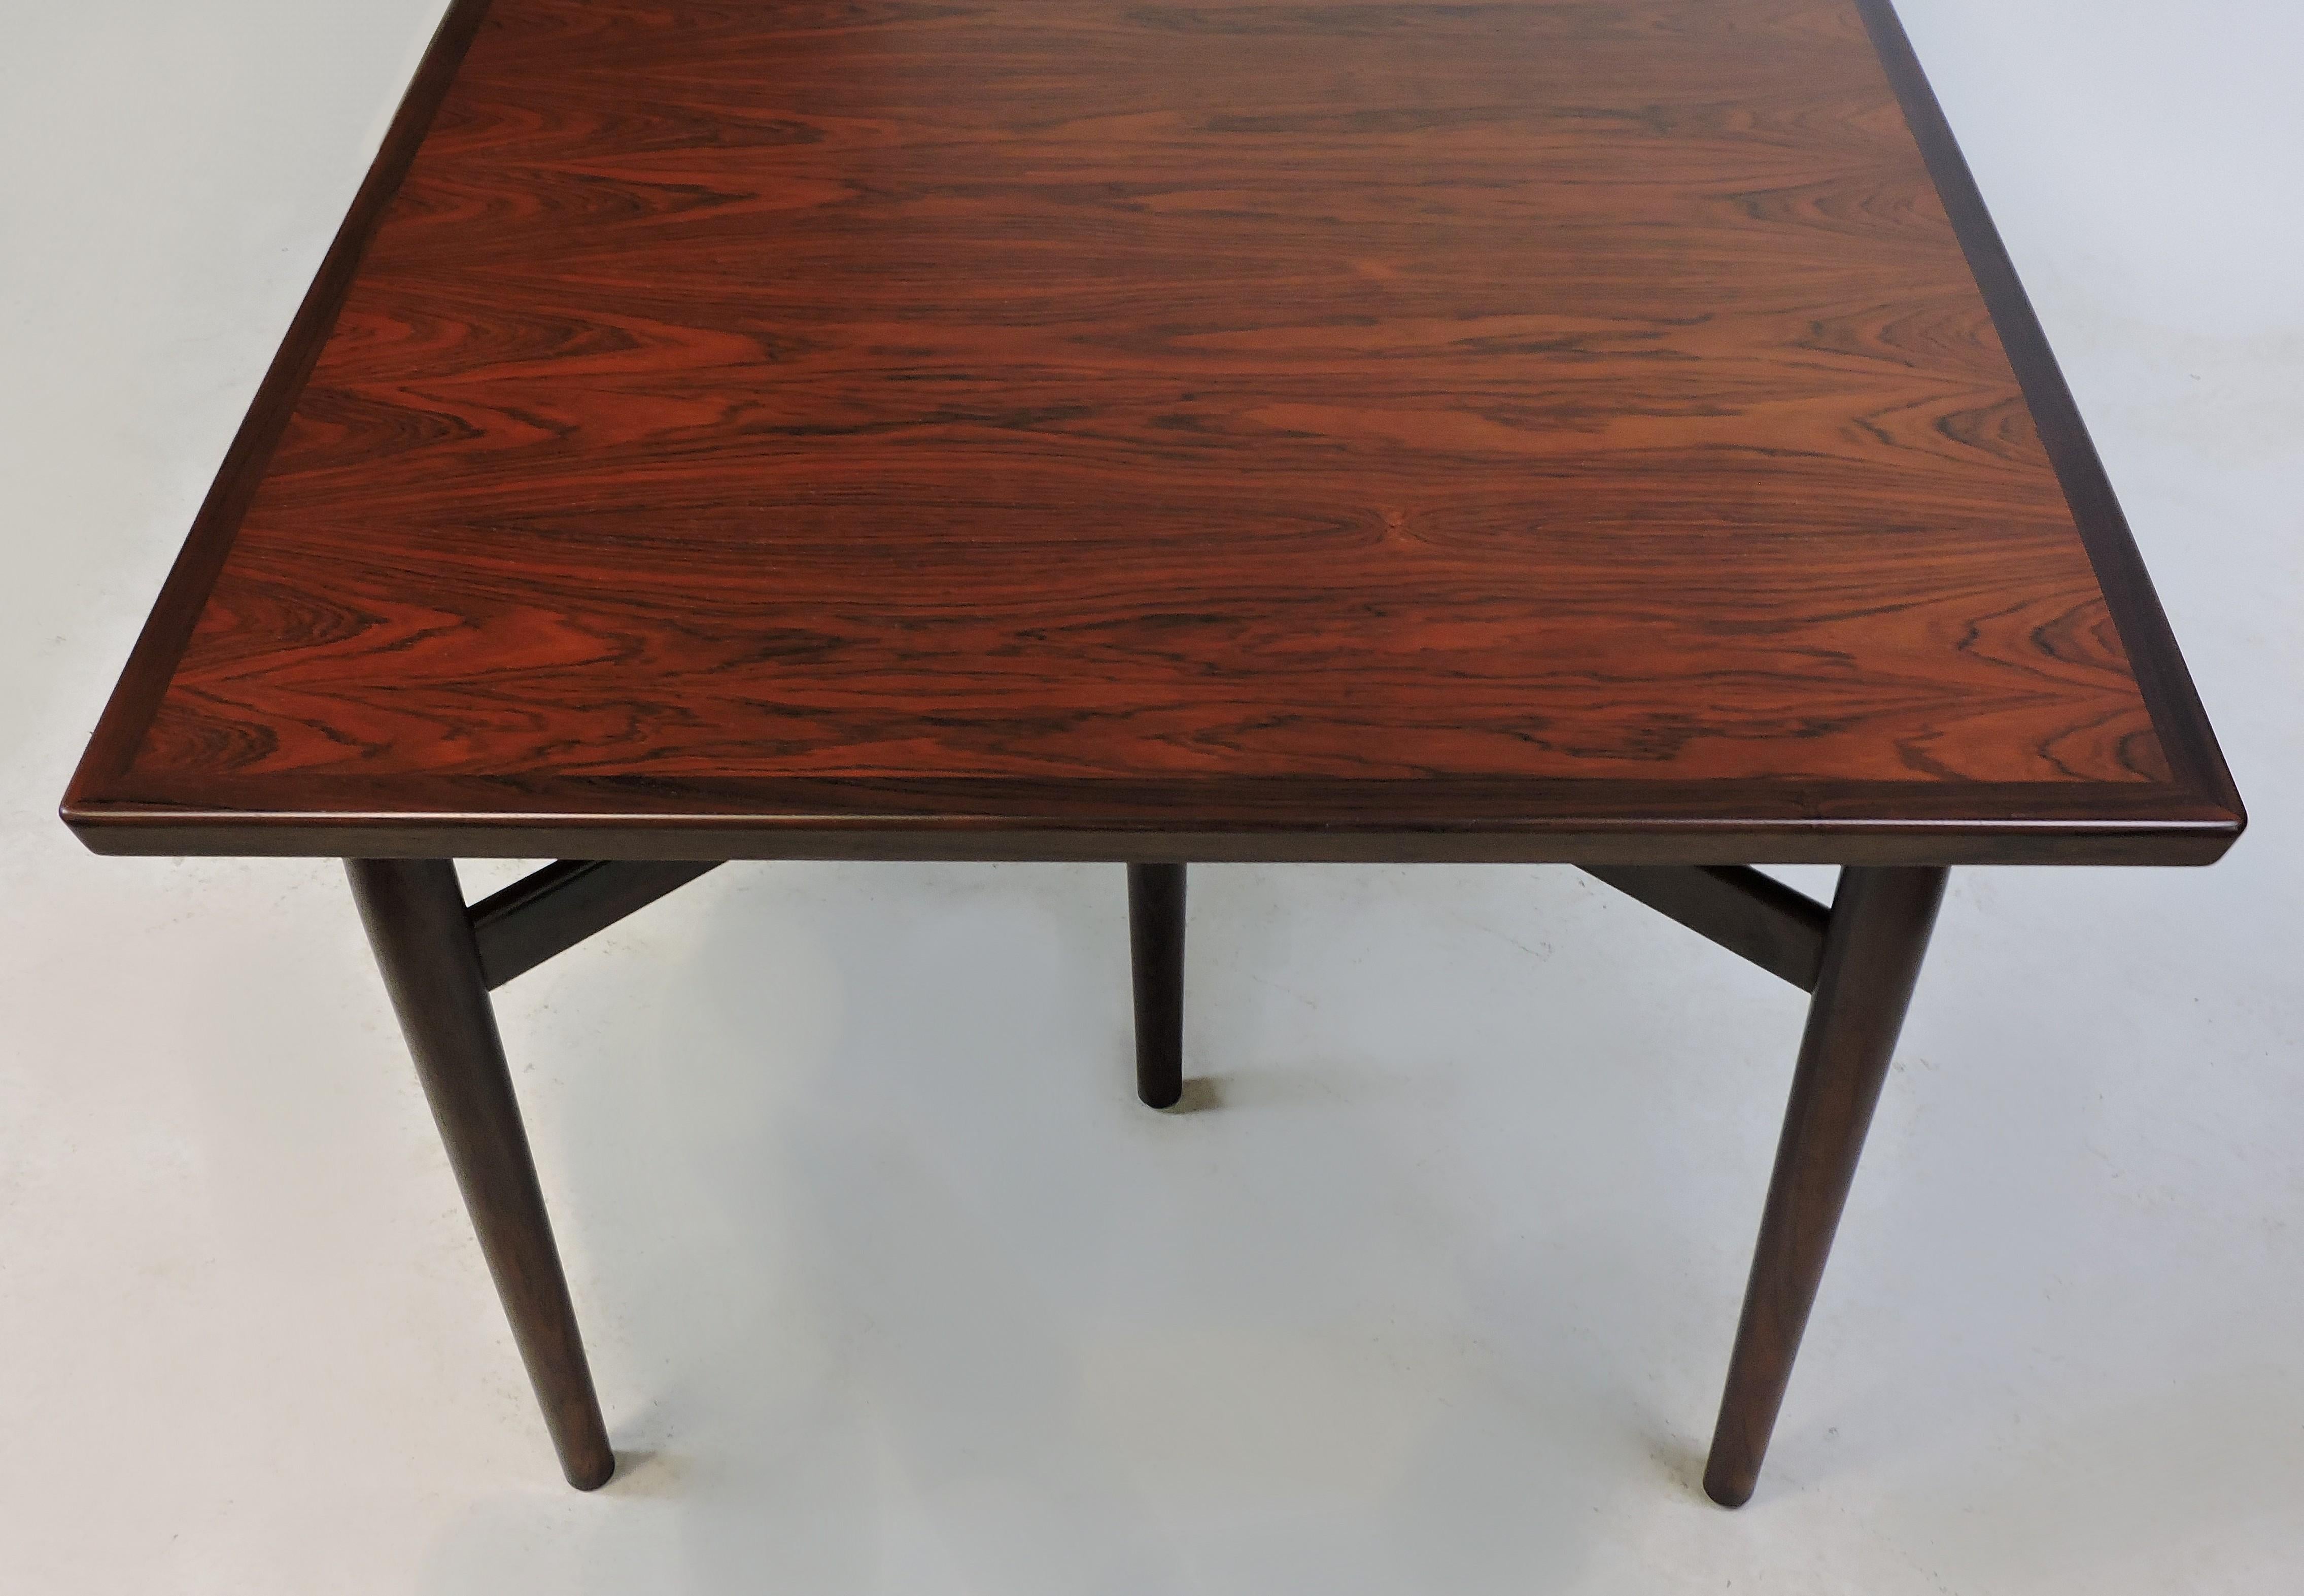 Elegant expandable dining or conference table in rosewood designed by Arne Vodder and manufactured in Denmark by Sibast. This table has a beautiful active wood grain and two self-storing leaves. It expands from 78 3/4 inches to 98 1/4 inches with